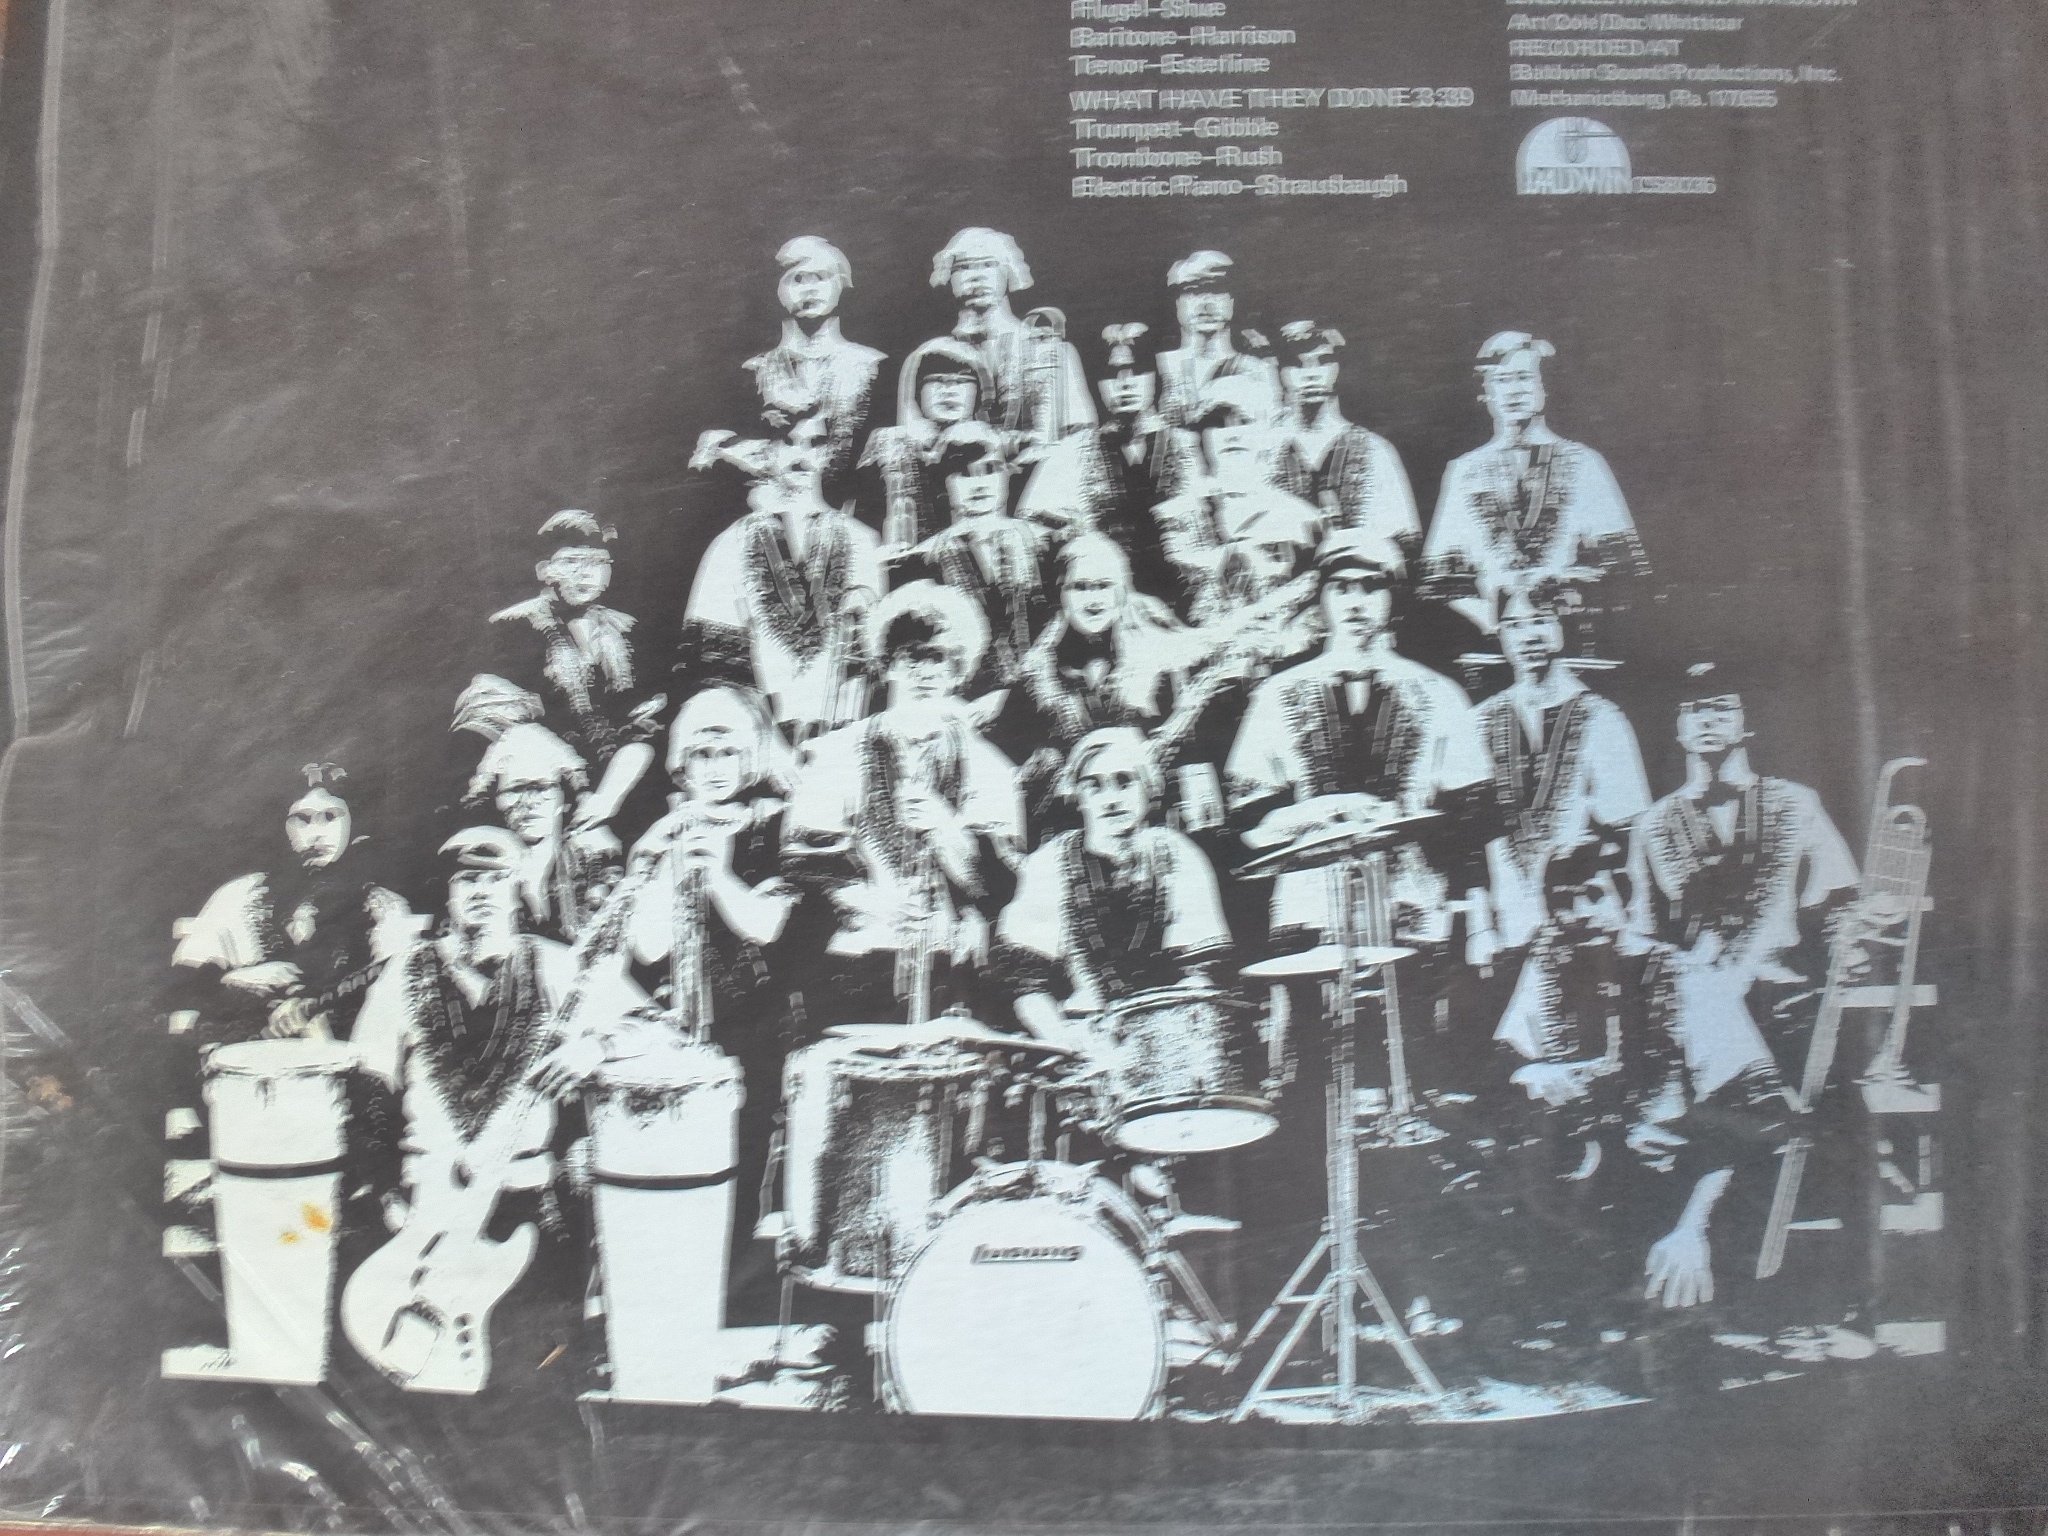 an old album showing band and drummers